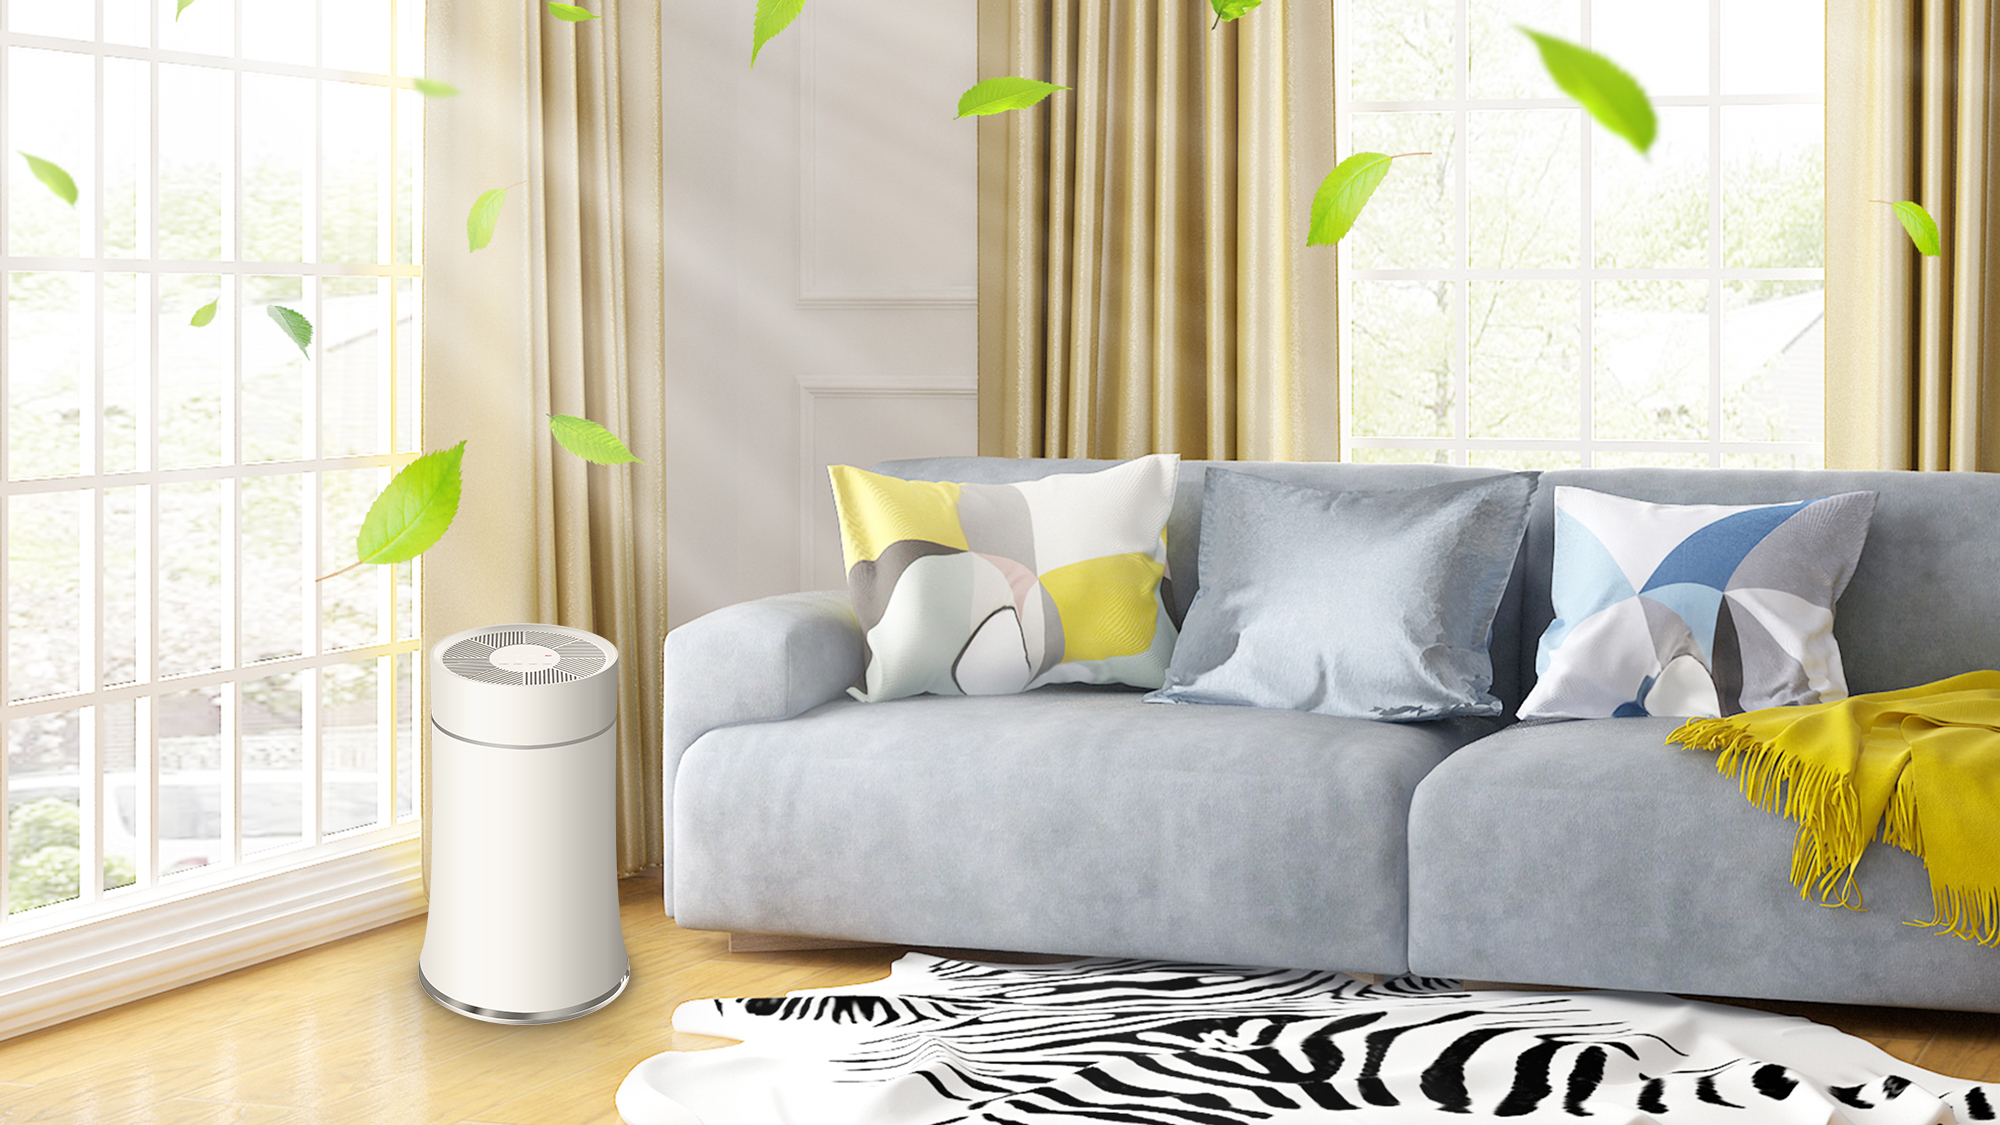 https://www.leeyoroto.com/c12-air-purifiers-that-focus-on-your-personal-breathing-product/